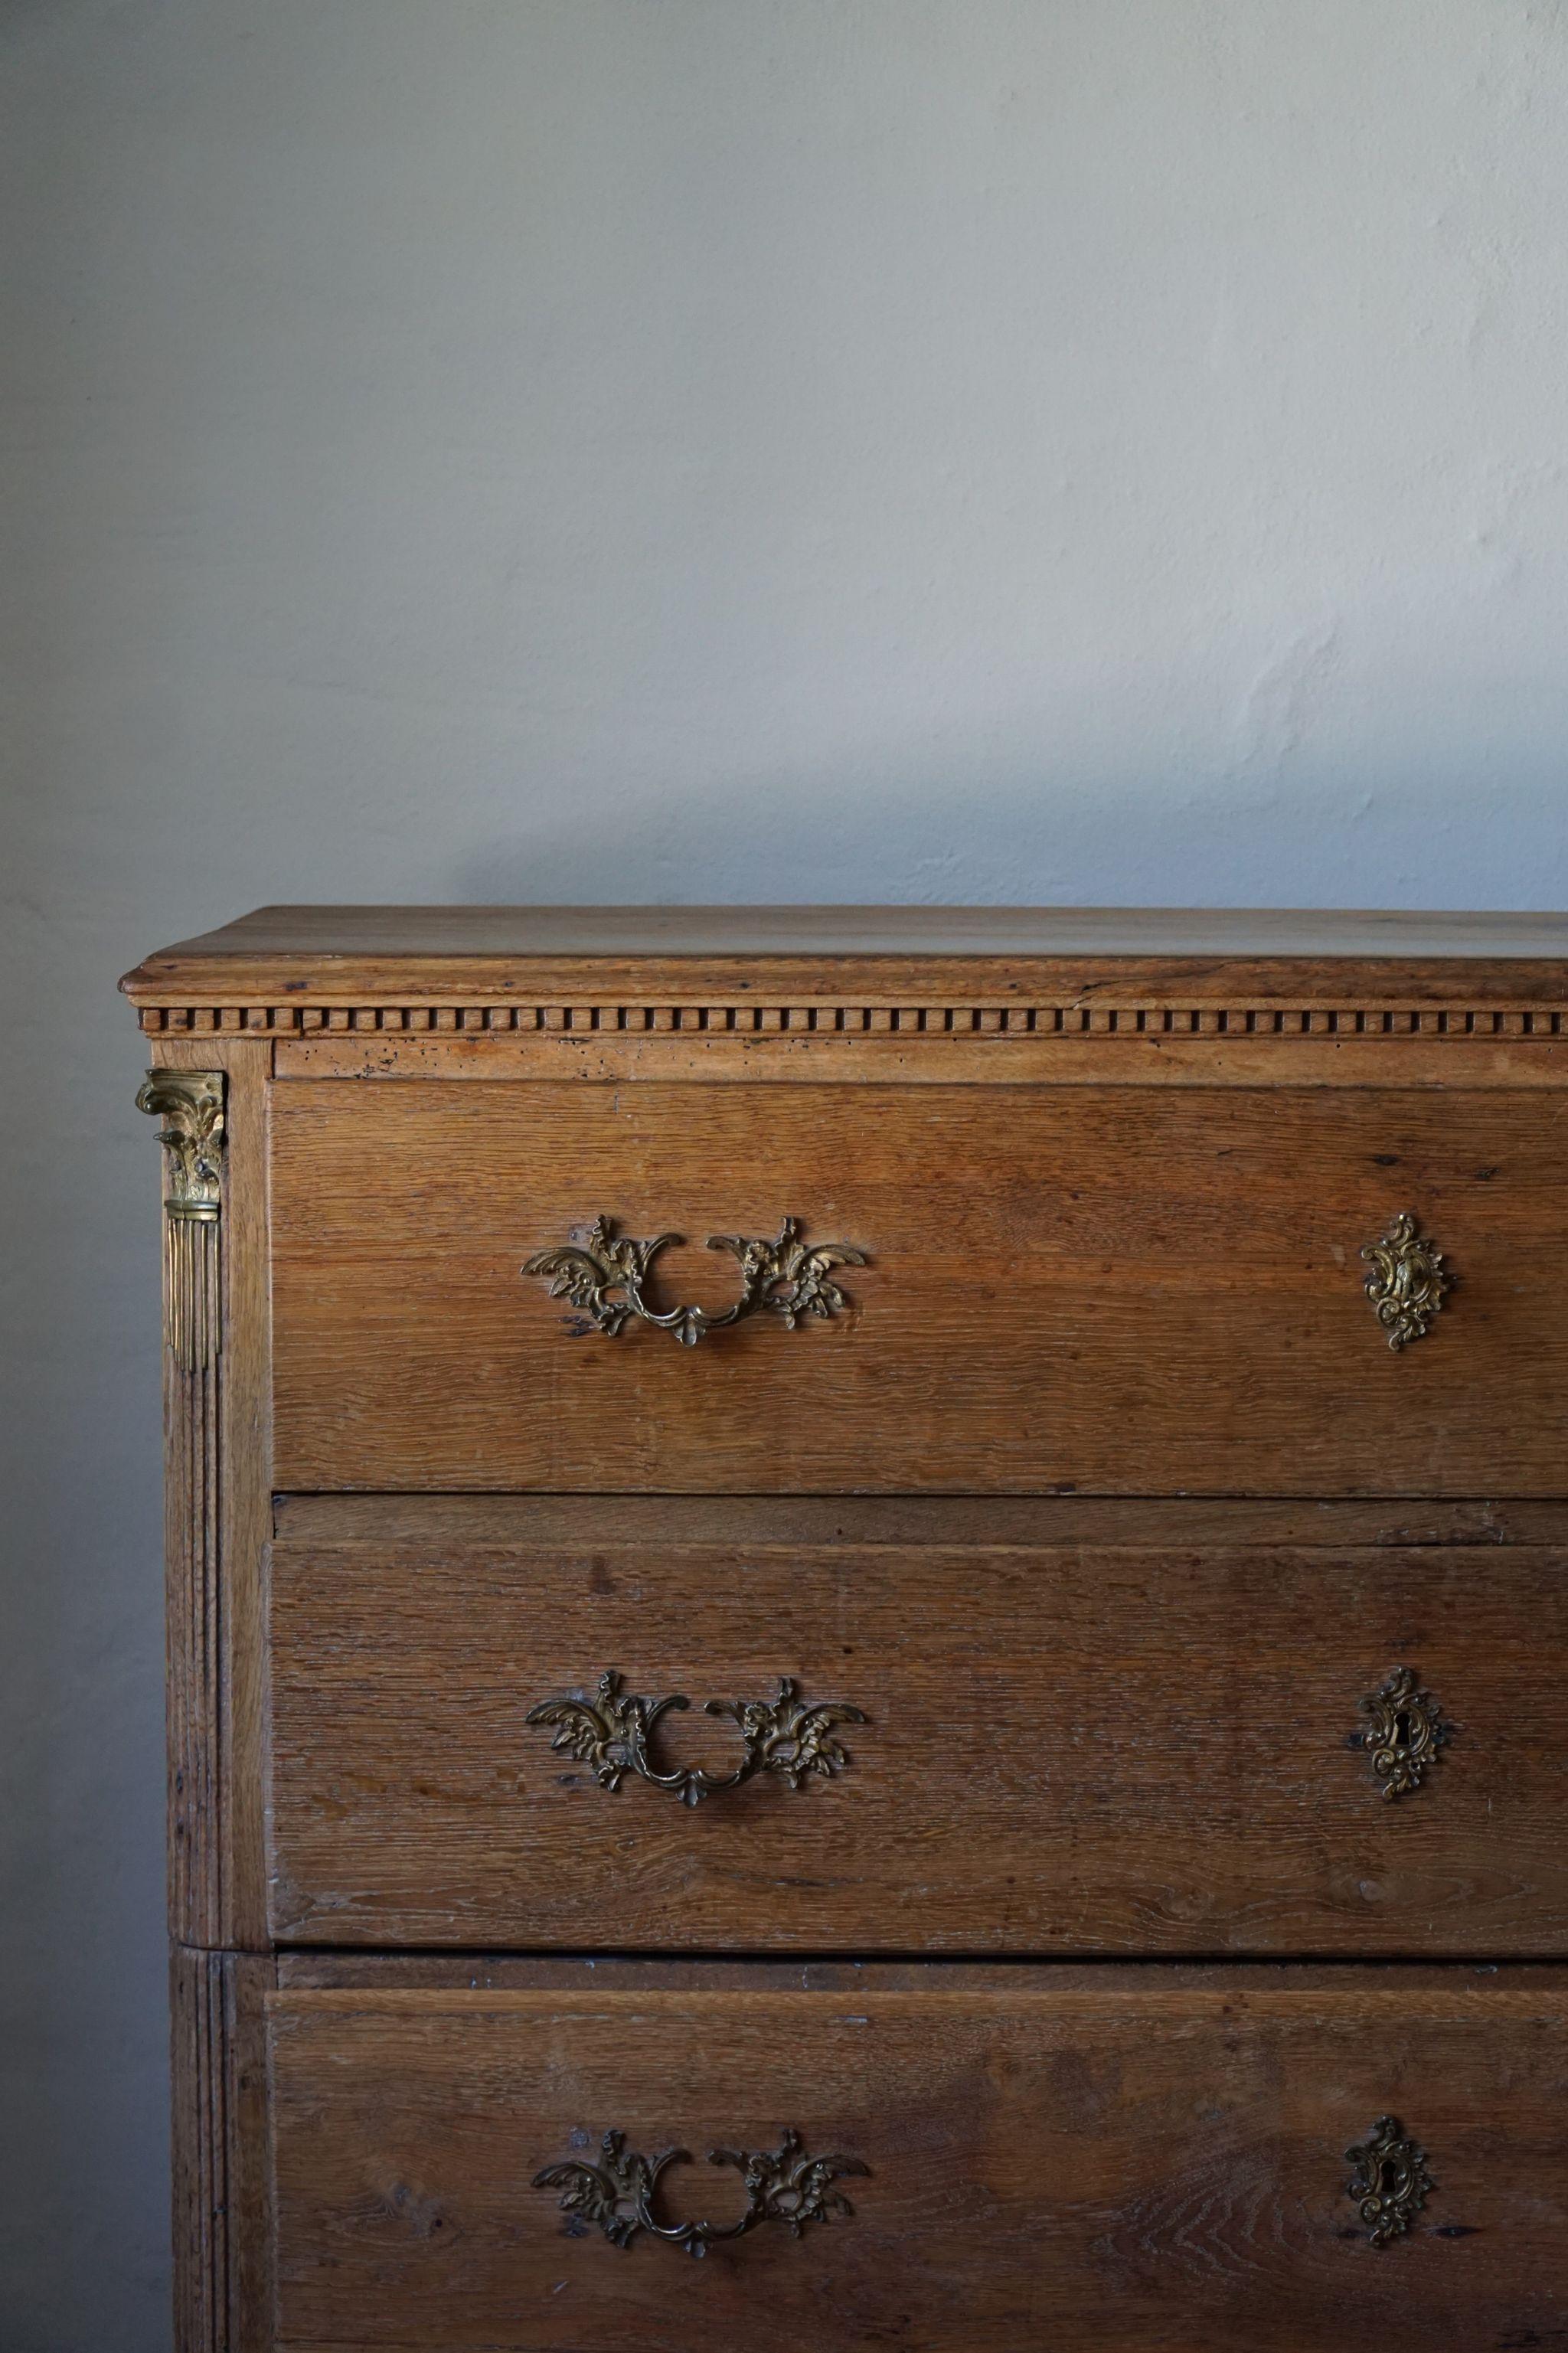 This beautiful Danish chest of drawers with brass handles has delightful carvings, adding a romantic touch to the solid oak. It is built in 2 sections, which makes it easier to move around. Made in mid-19th century.

The overall impression is